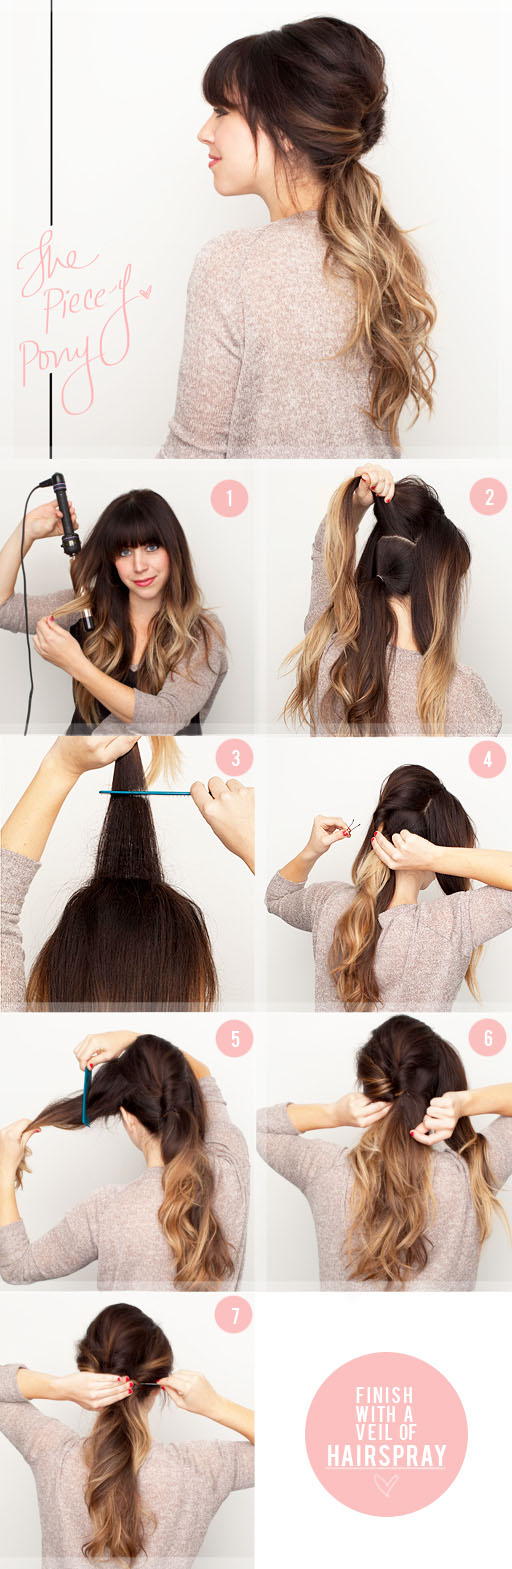 hairstyle10